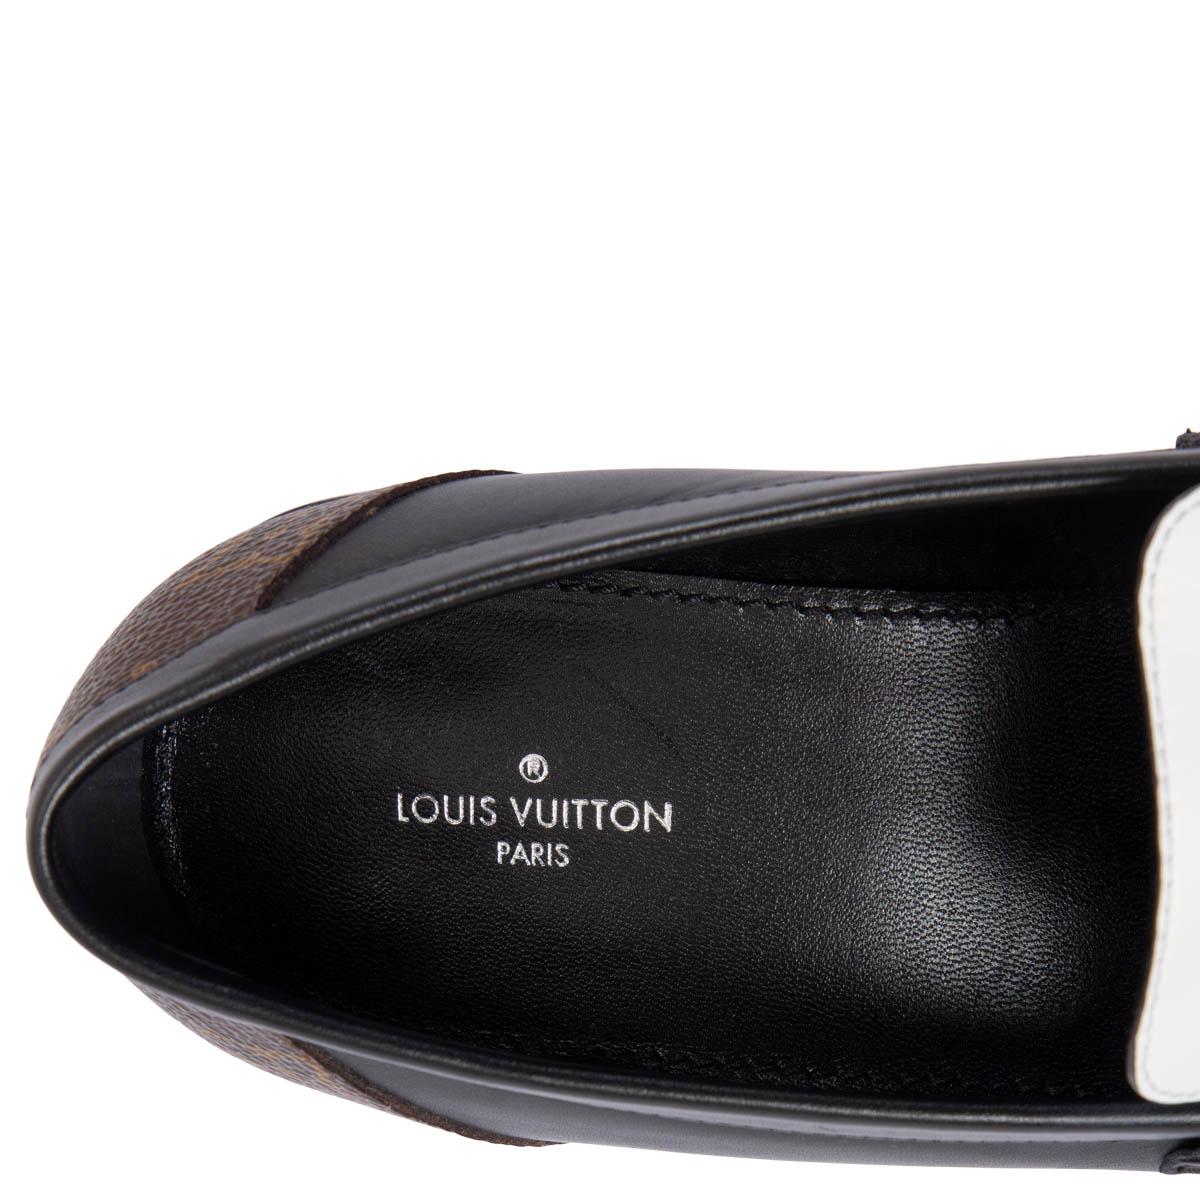 LOUIS VUITTON black & white leather 2020 ACADEMY Loafers Shoes 38.5 1